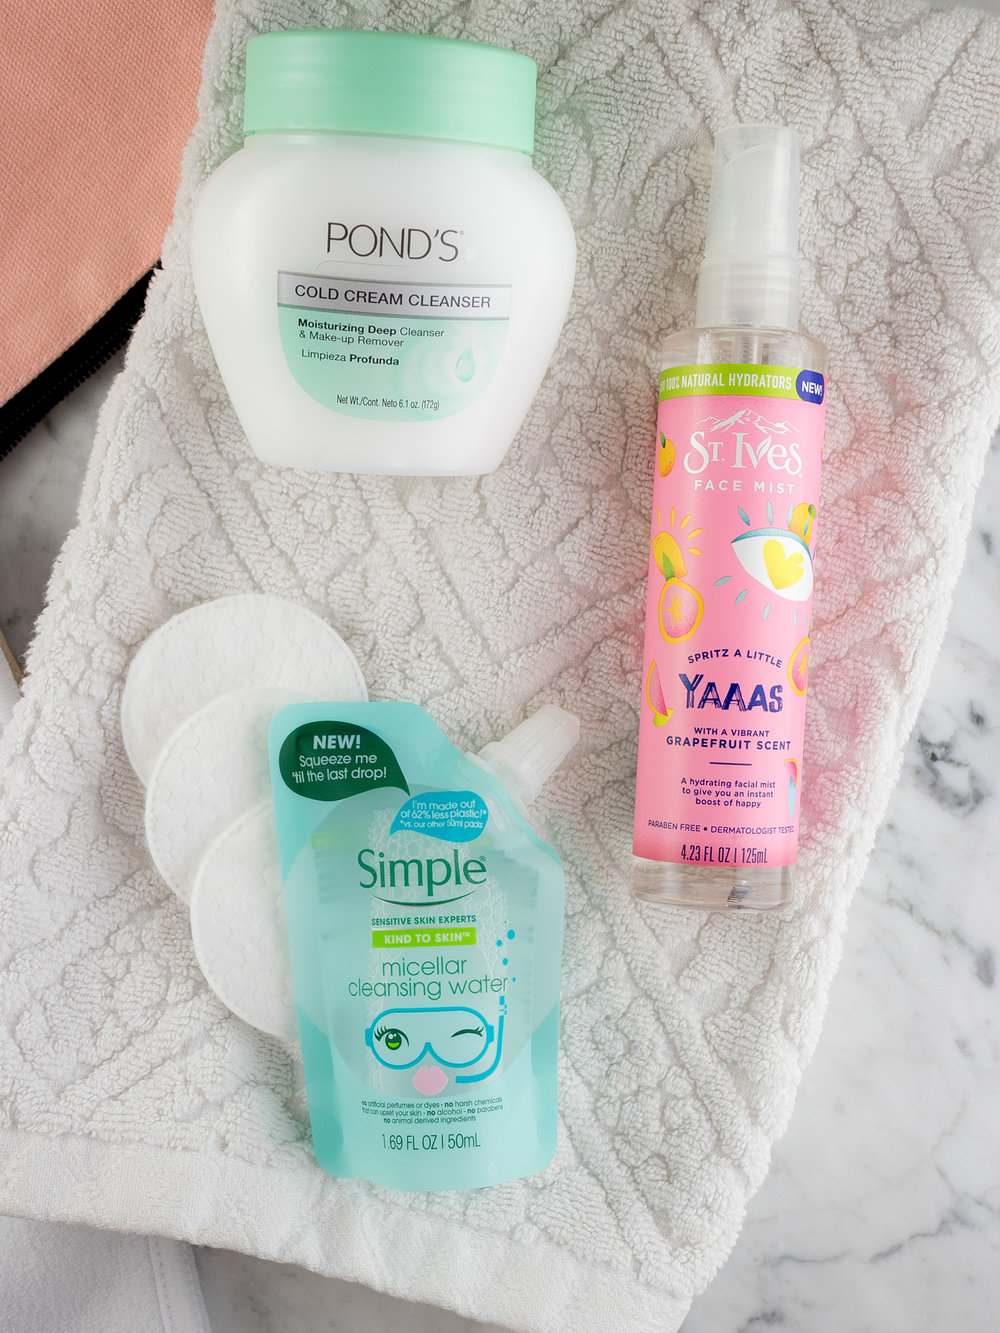 Facing the Summer with Skincare from CVS